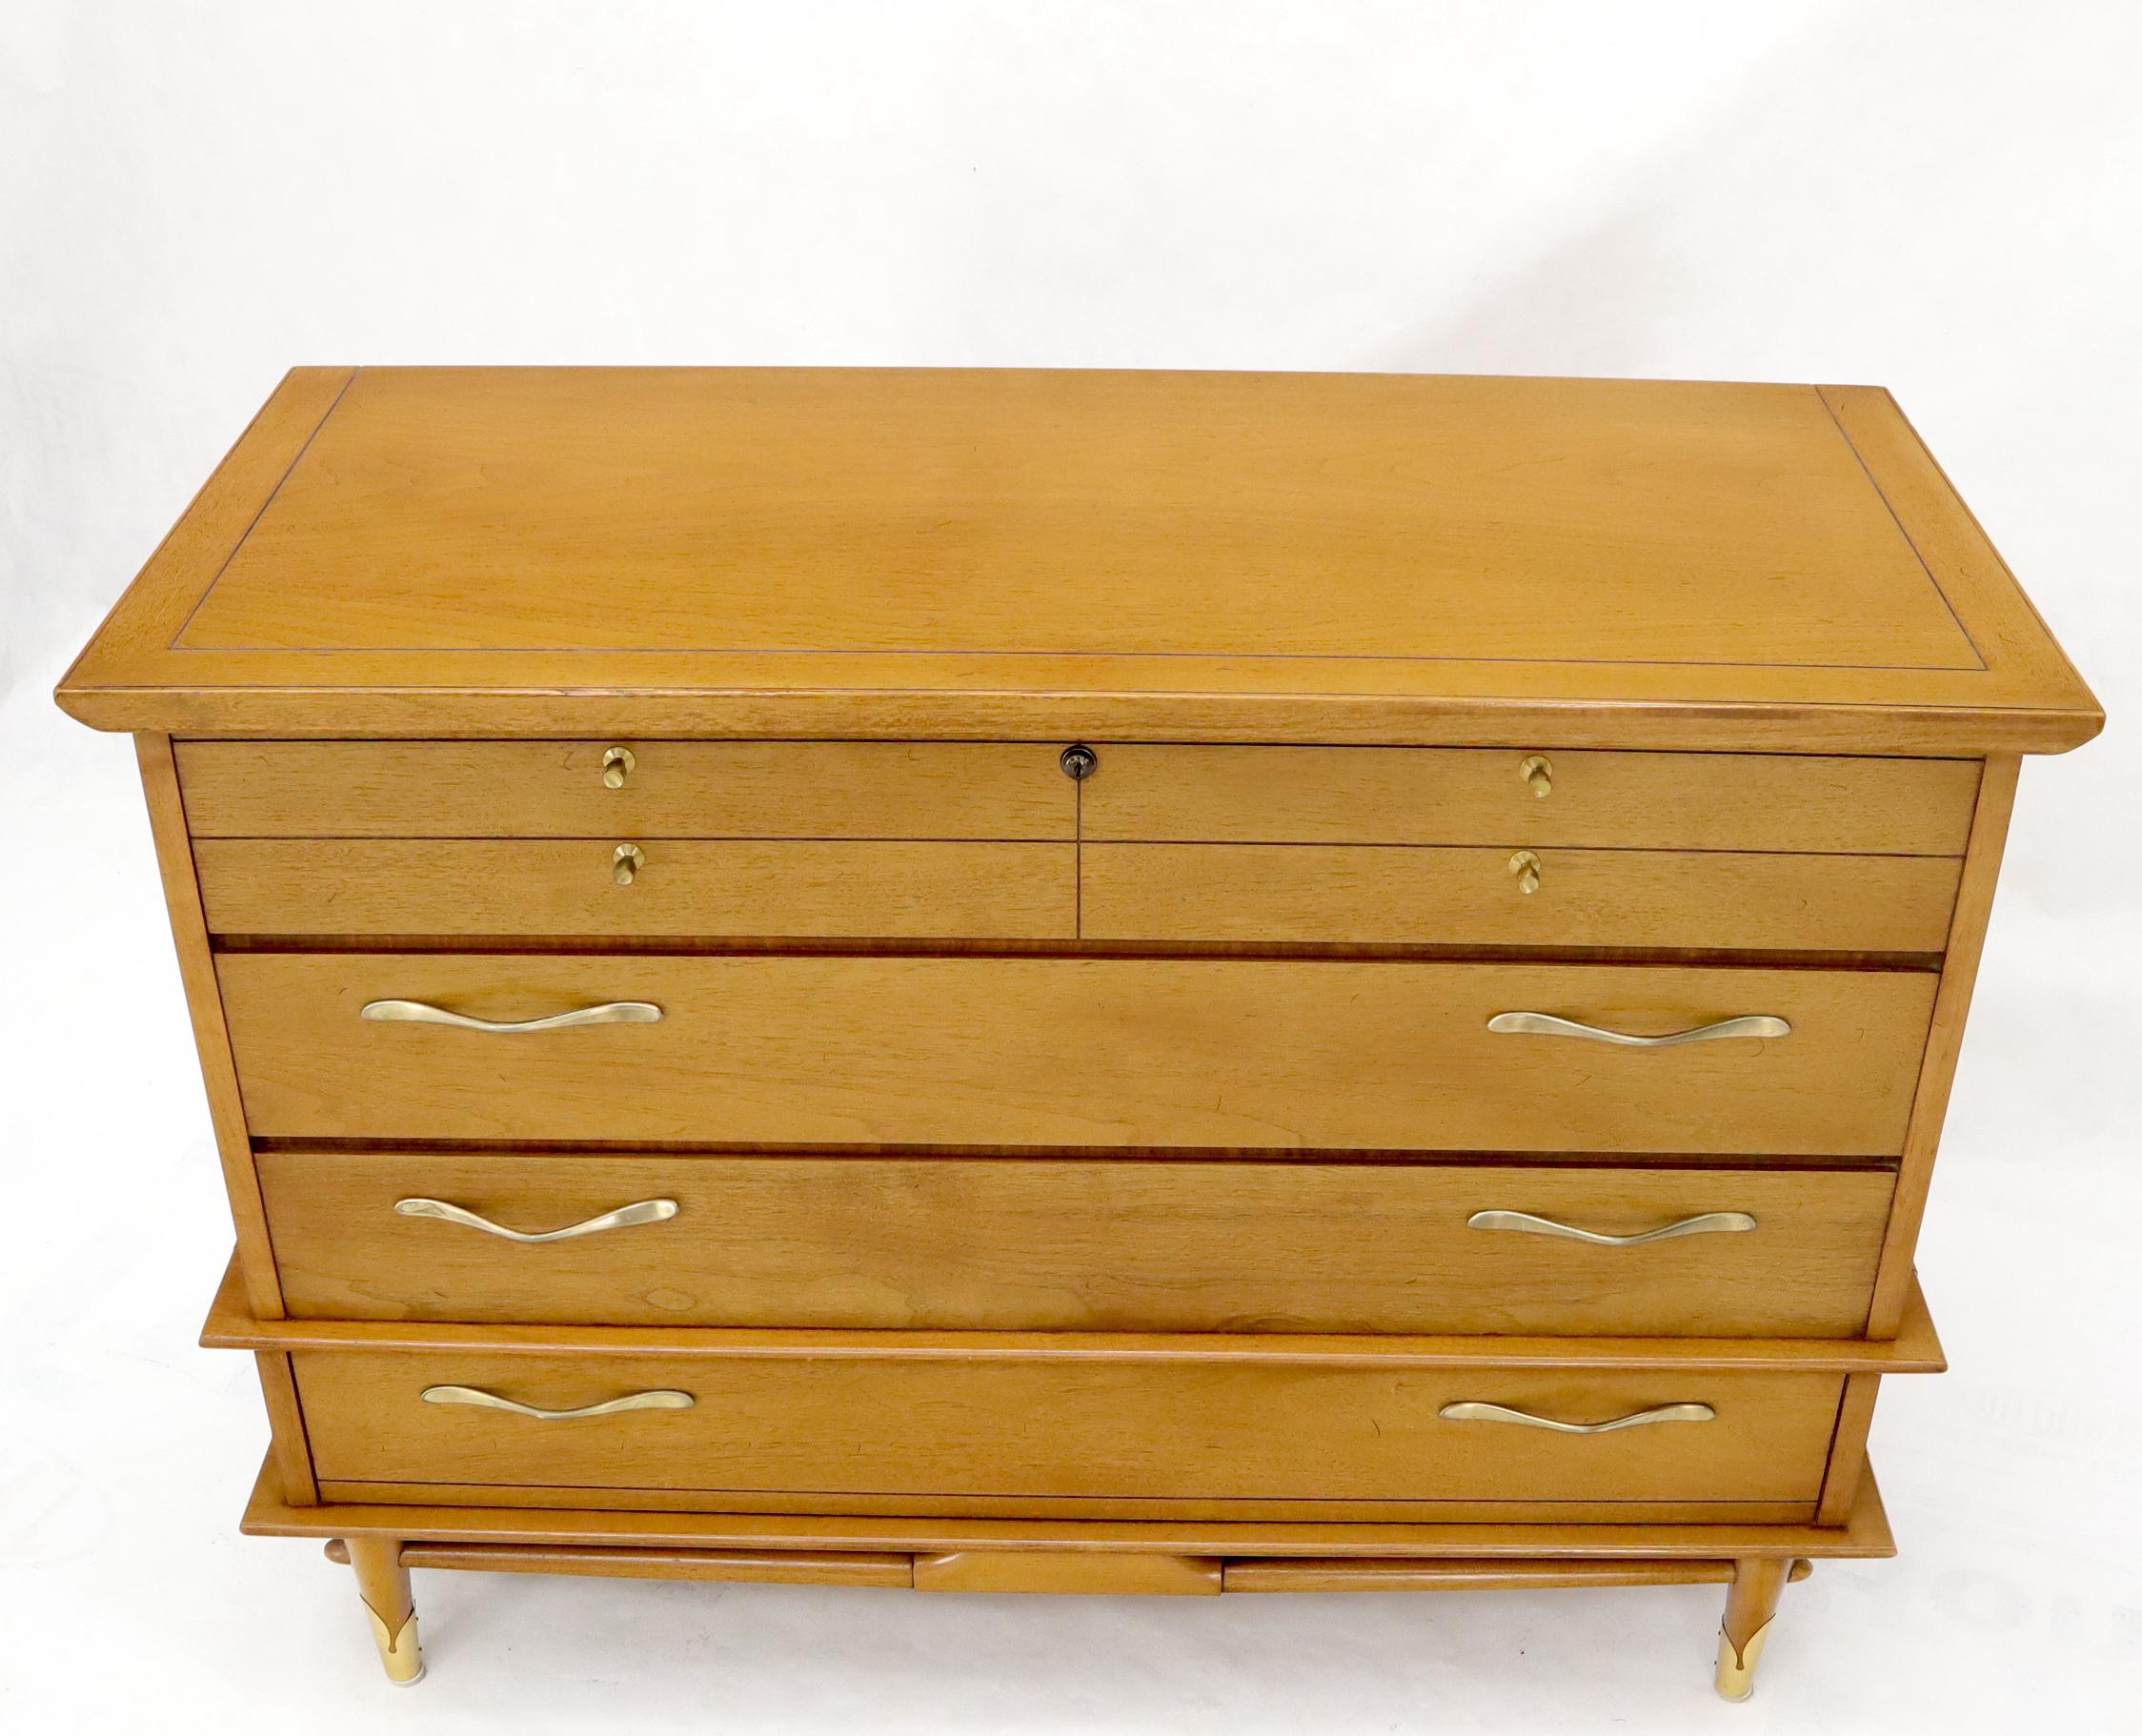 Mid-Century Modern light walnut tall cedar hope chest dresser by Lane. Very clean original condition figural metal legs tips connected with bullet shape stretches.